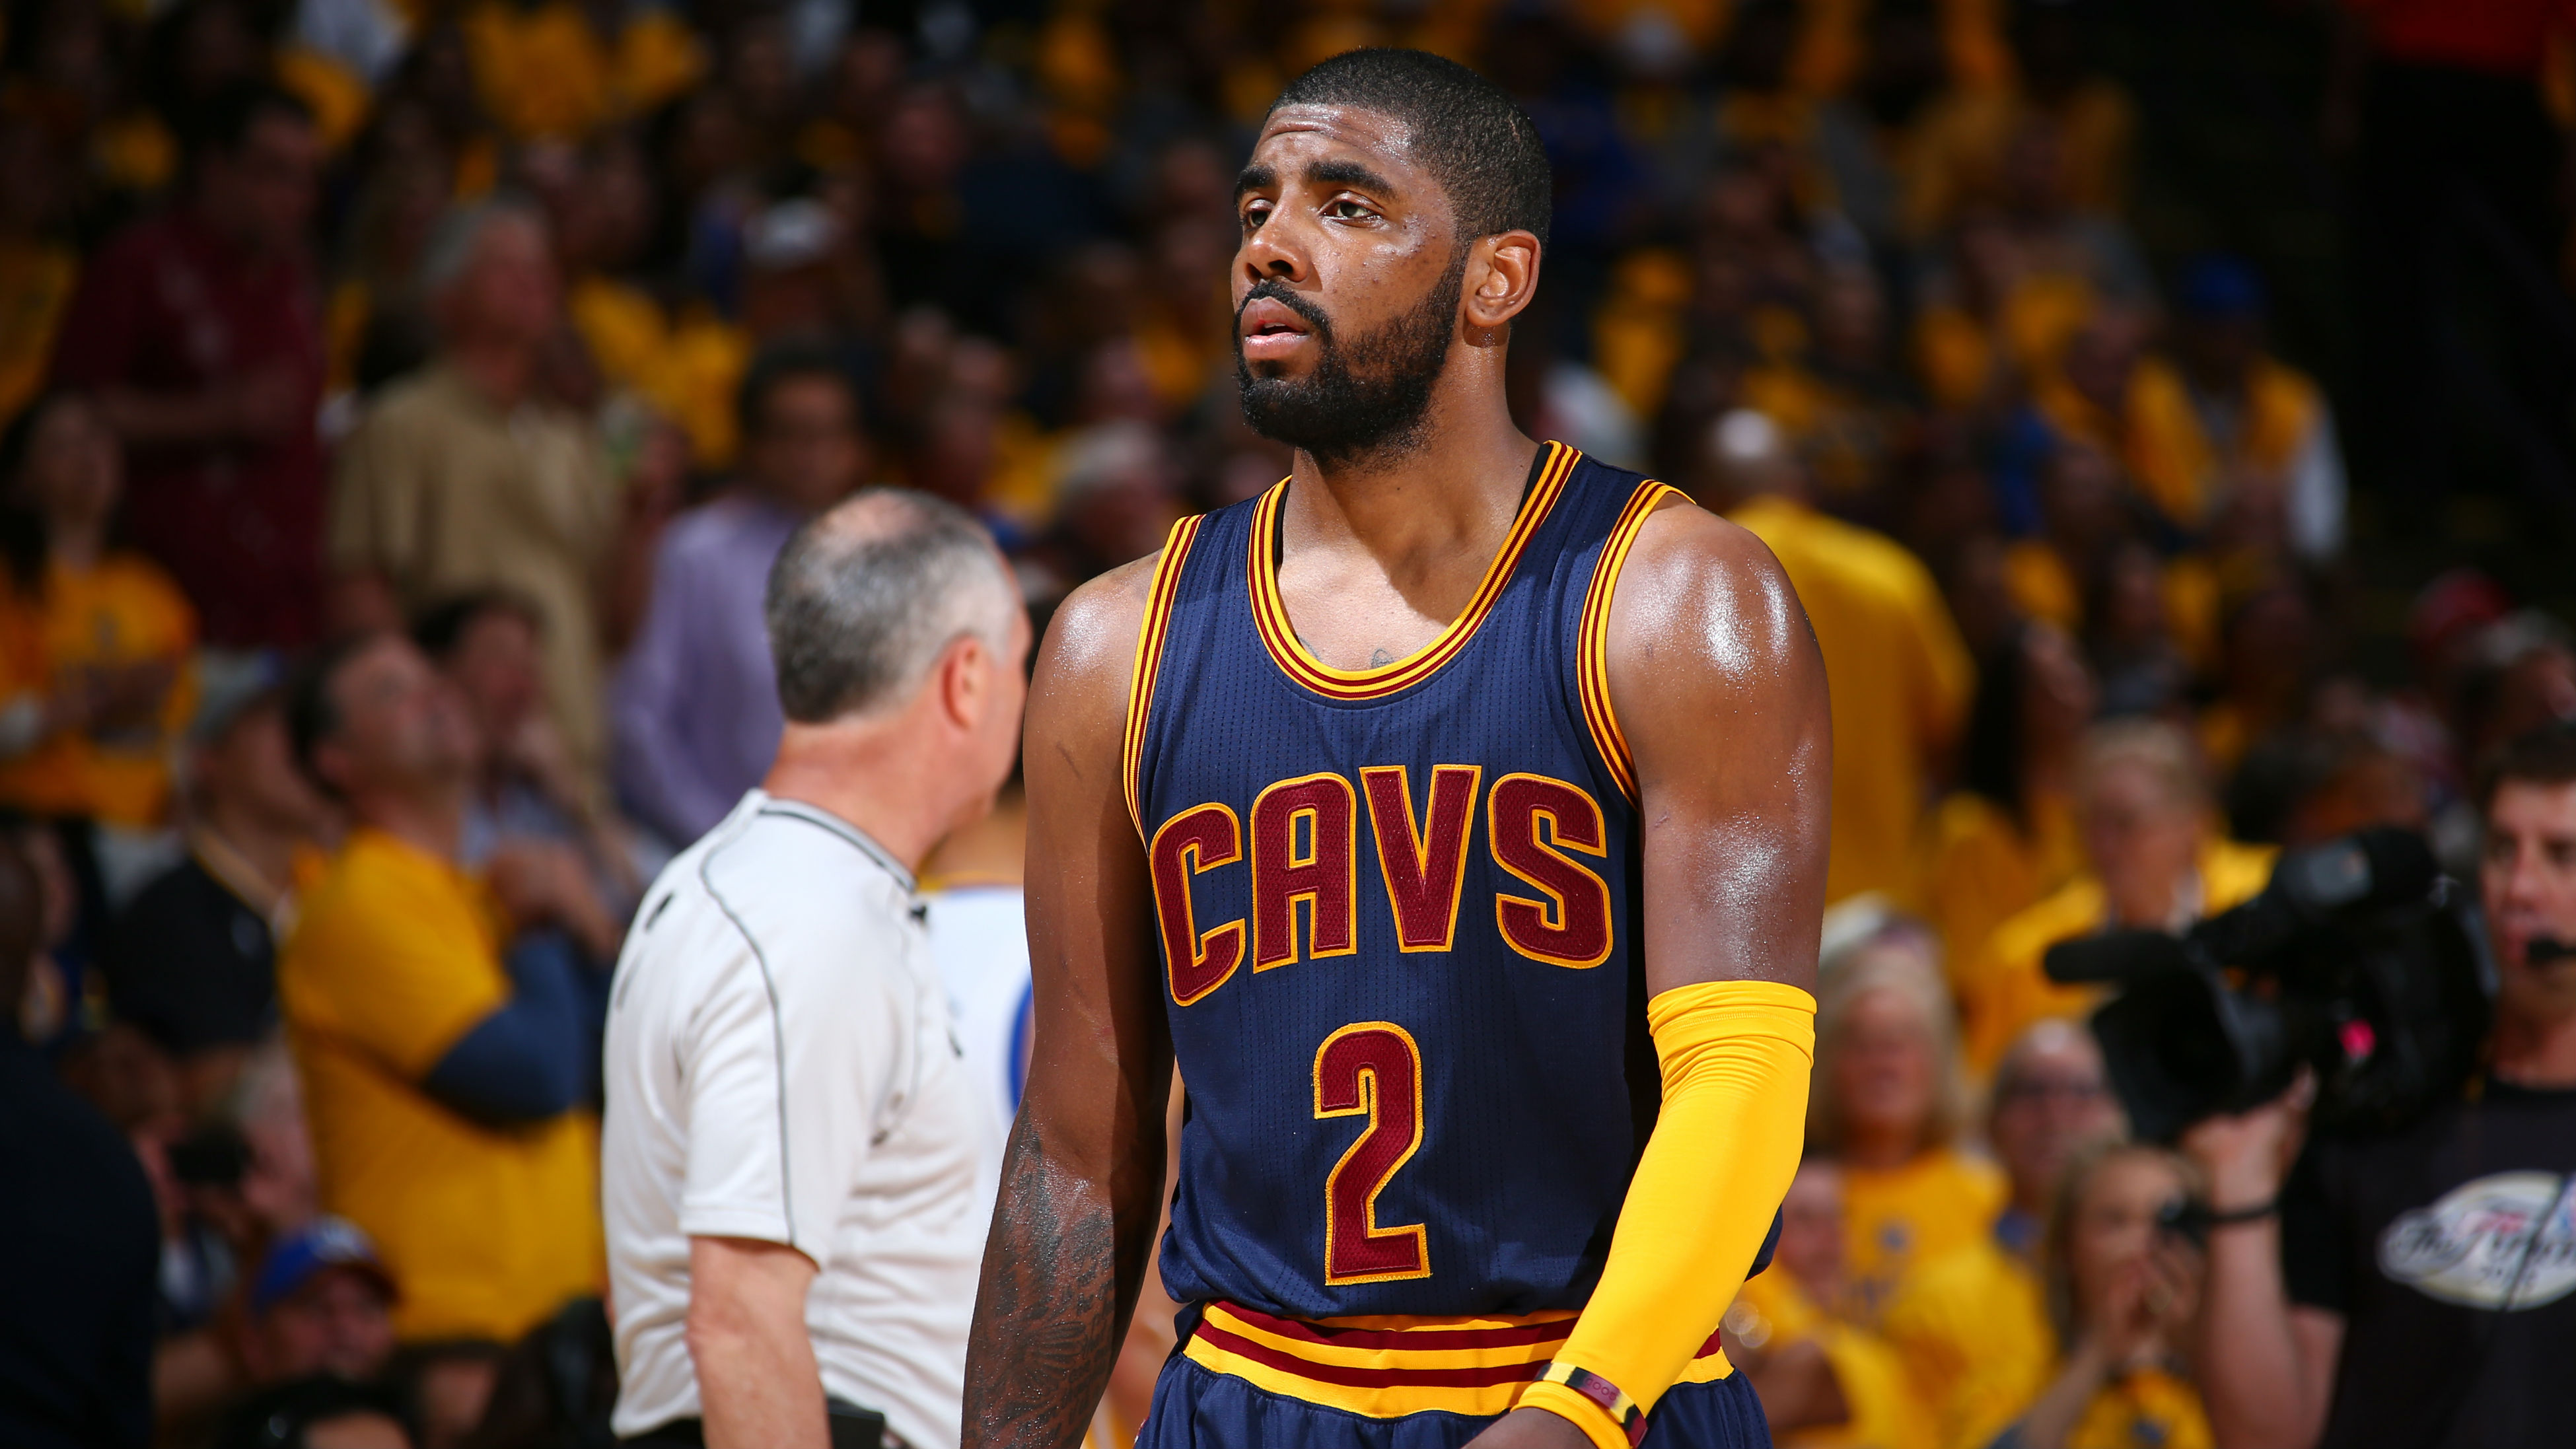 Kyrie Irving #15